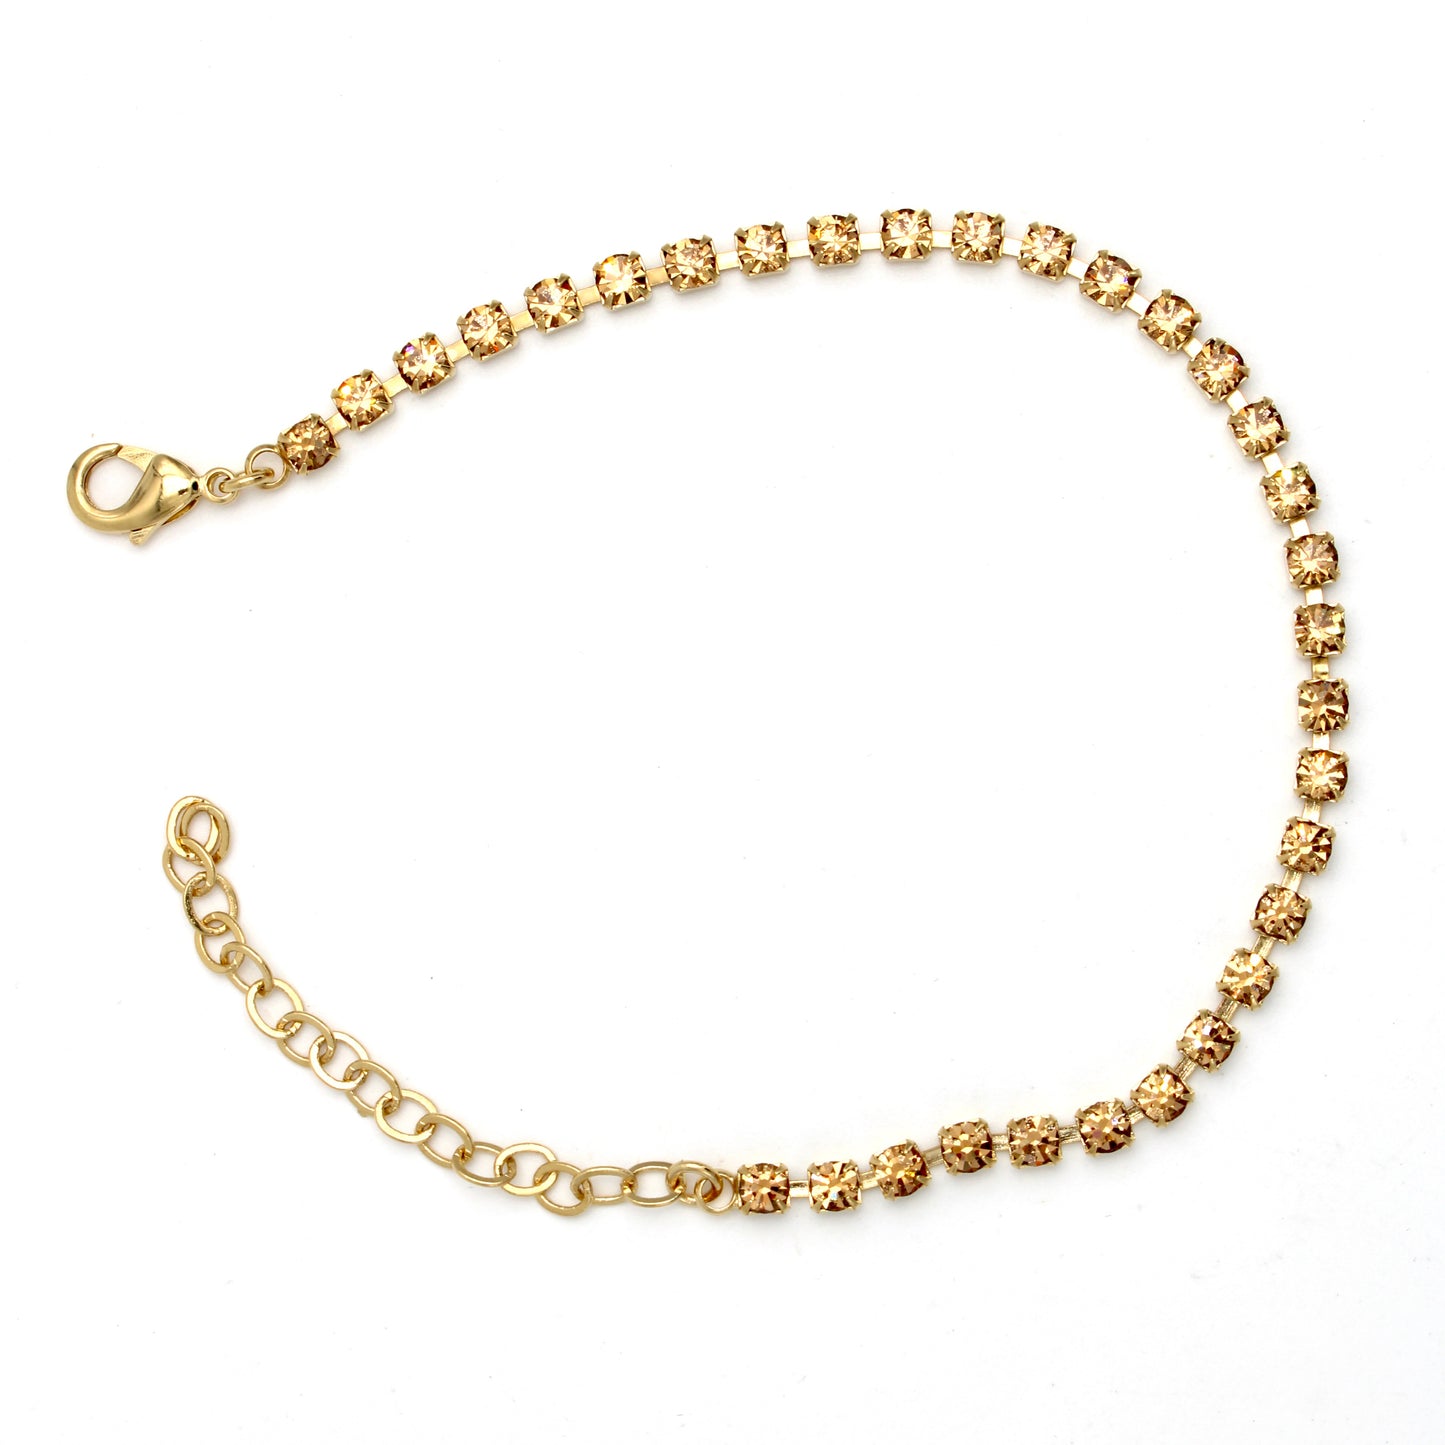 Golden Petite Crystal Anklet in Gold- LaHola - MaryTyke's